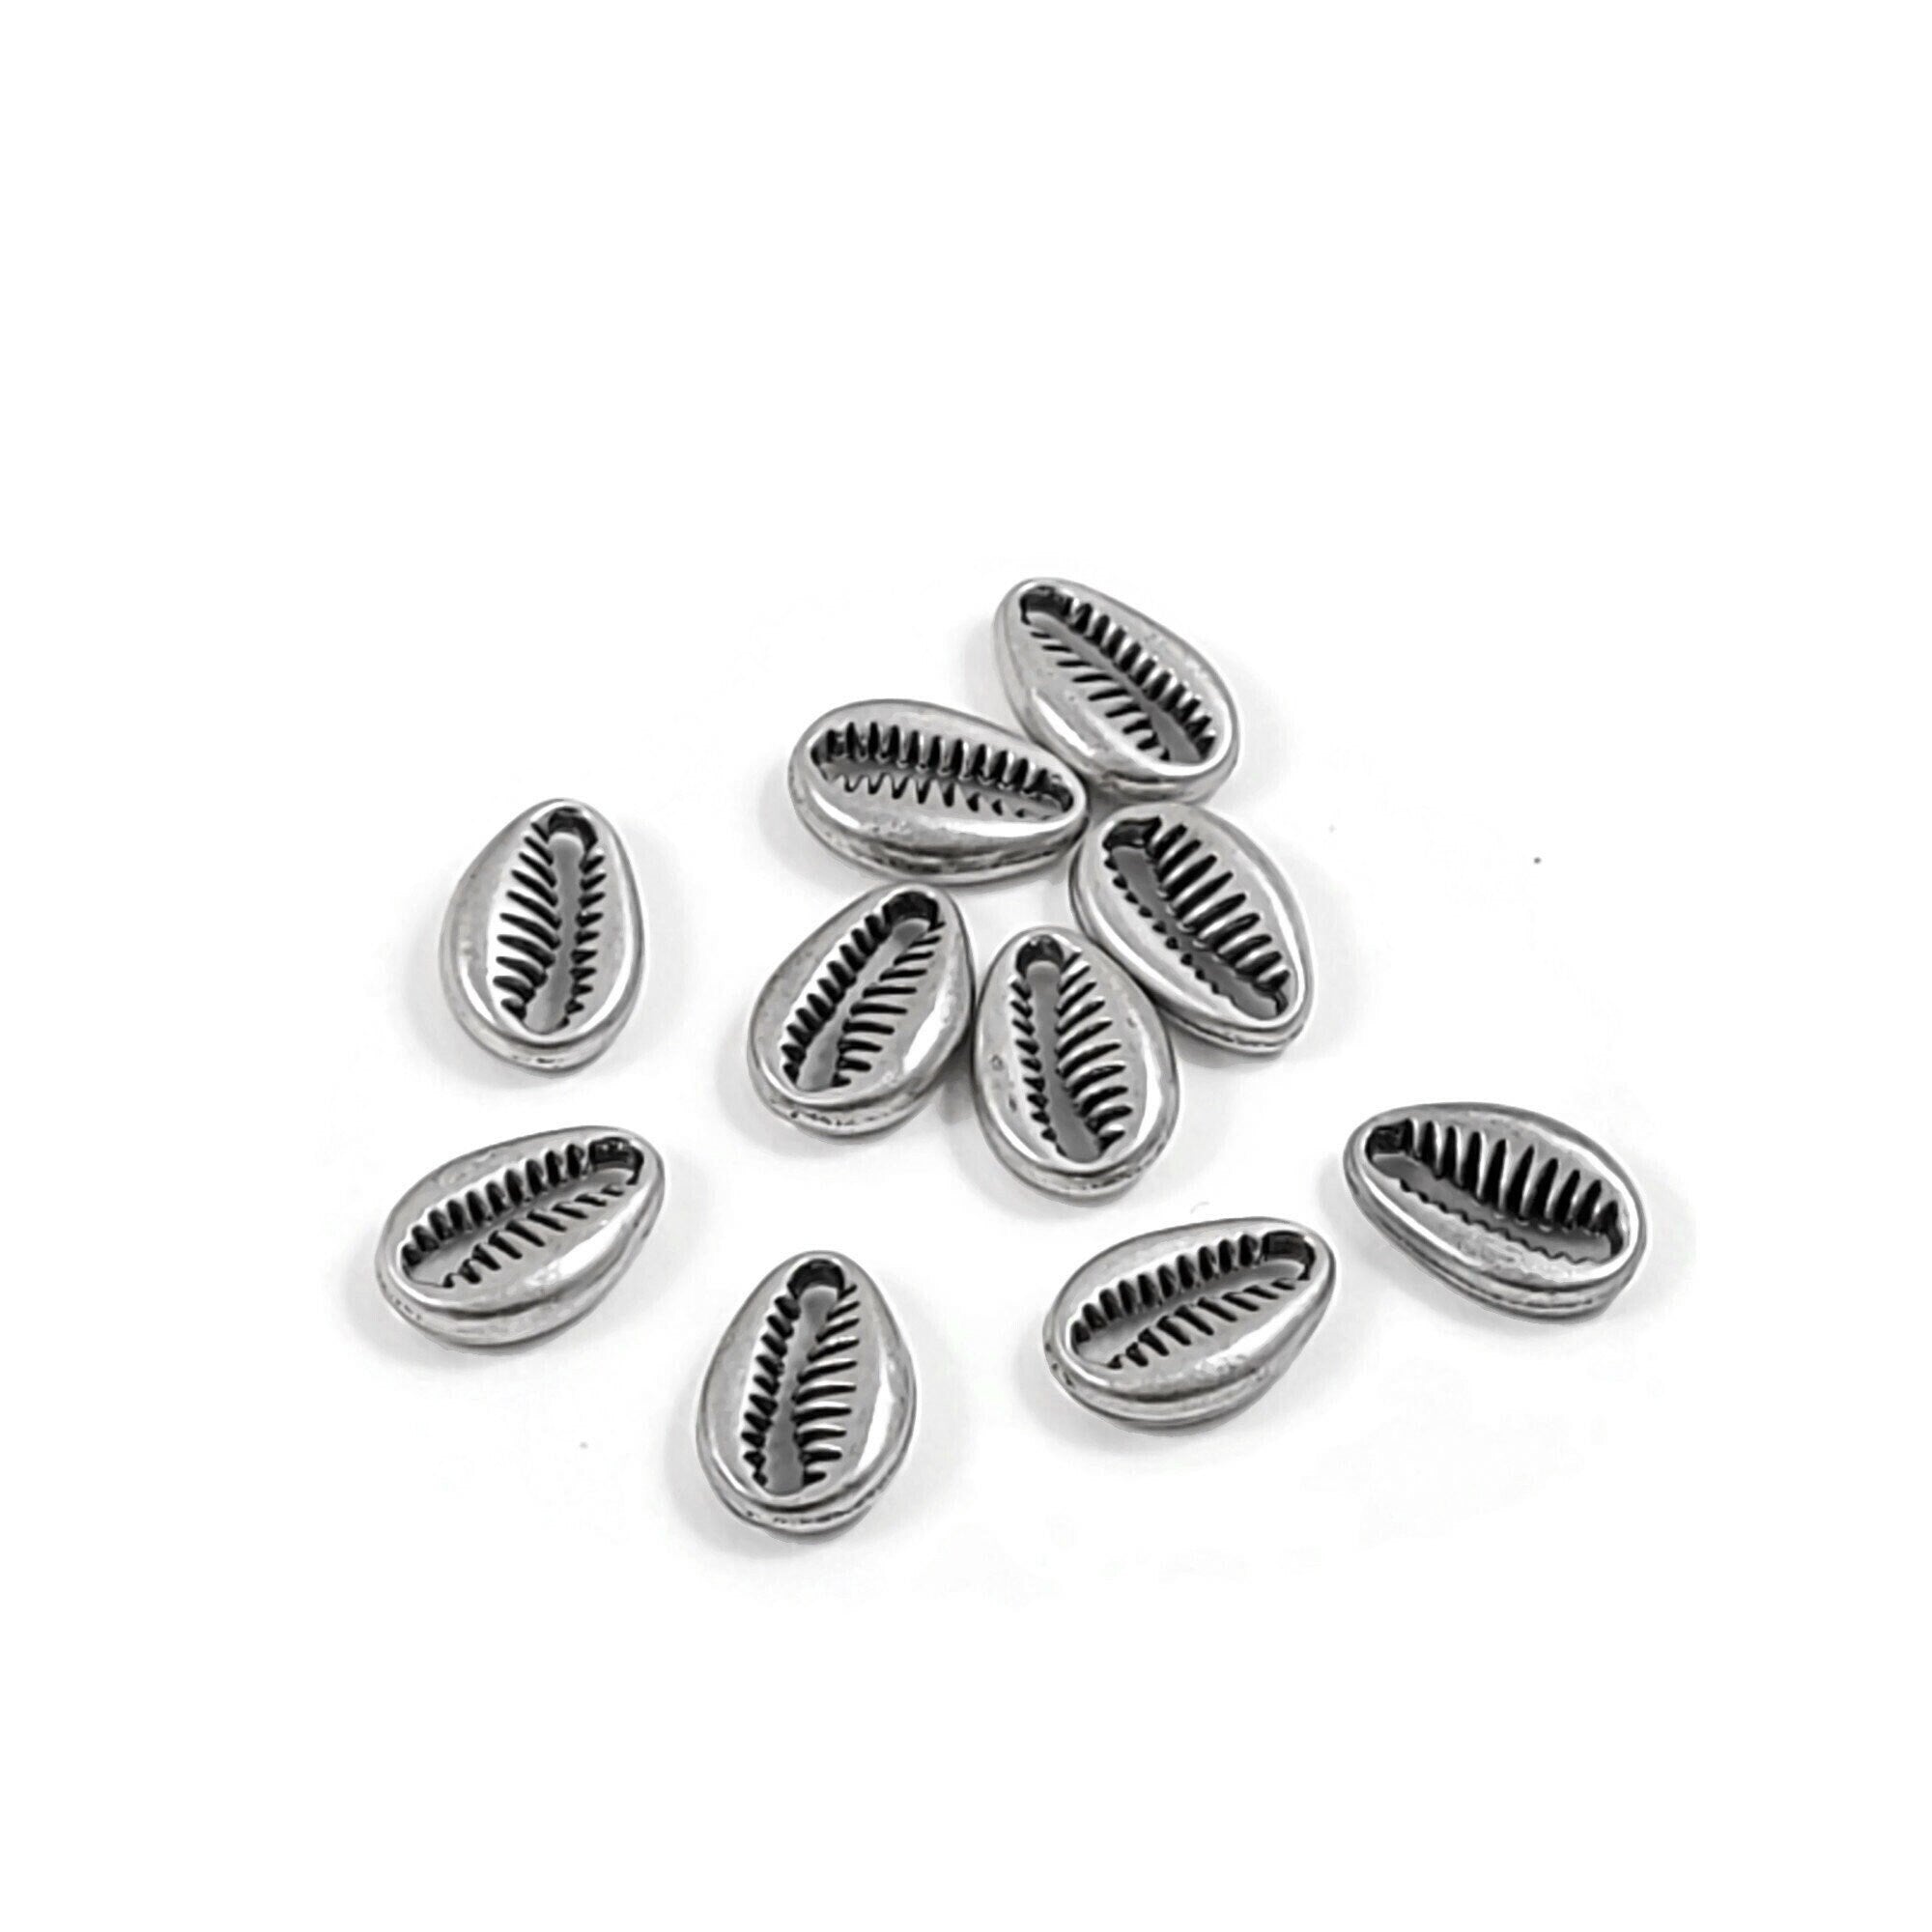 Cowrie shell connector charms, 12mm nickel free ocean pendants, Hypoallergenic nautical jewelry making